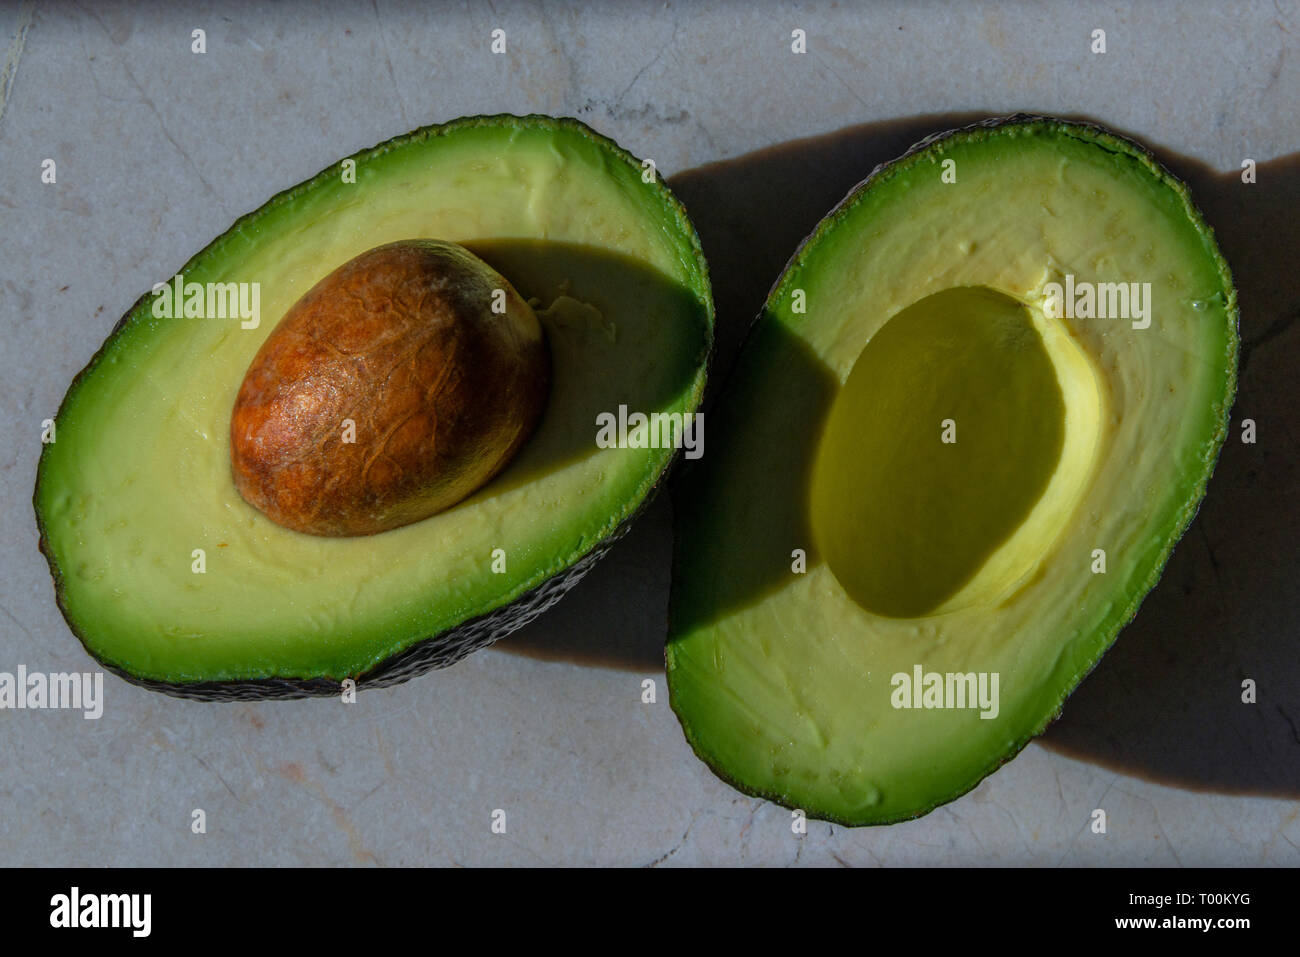 A perfectly ripe Avocado fruit, with seed, cut in two ready to scoop. The avocado belongs to the genus Persea in the Lauraceae family. Stock Photo